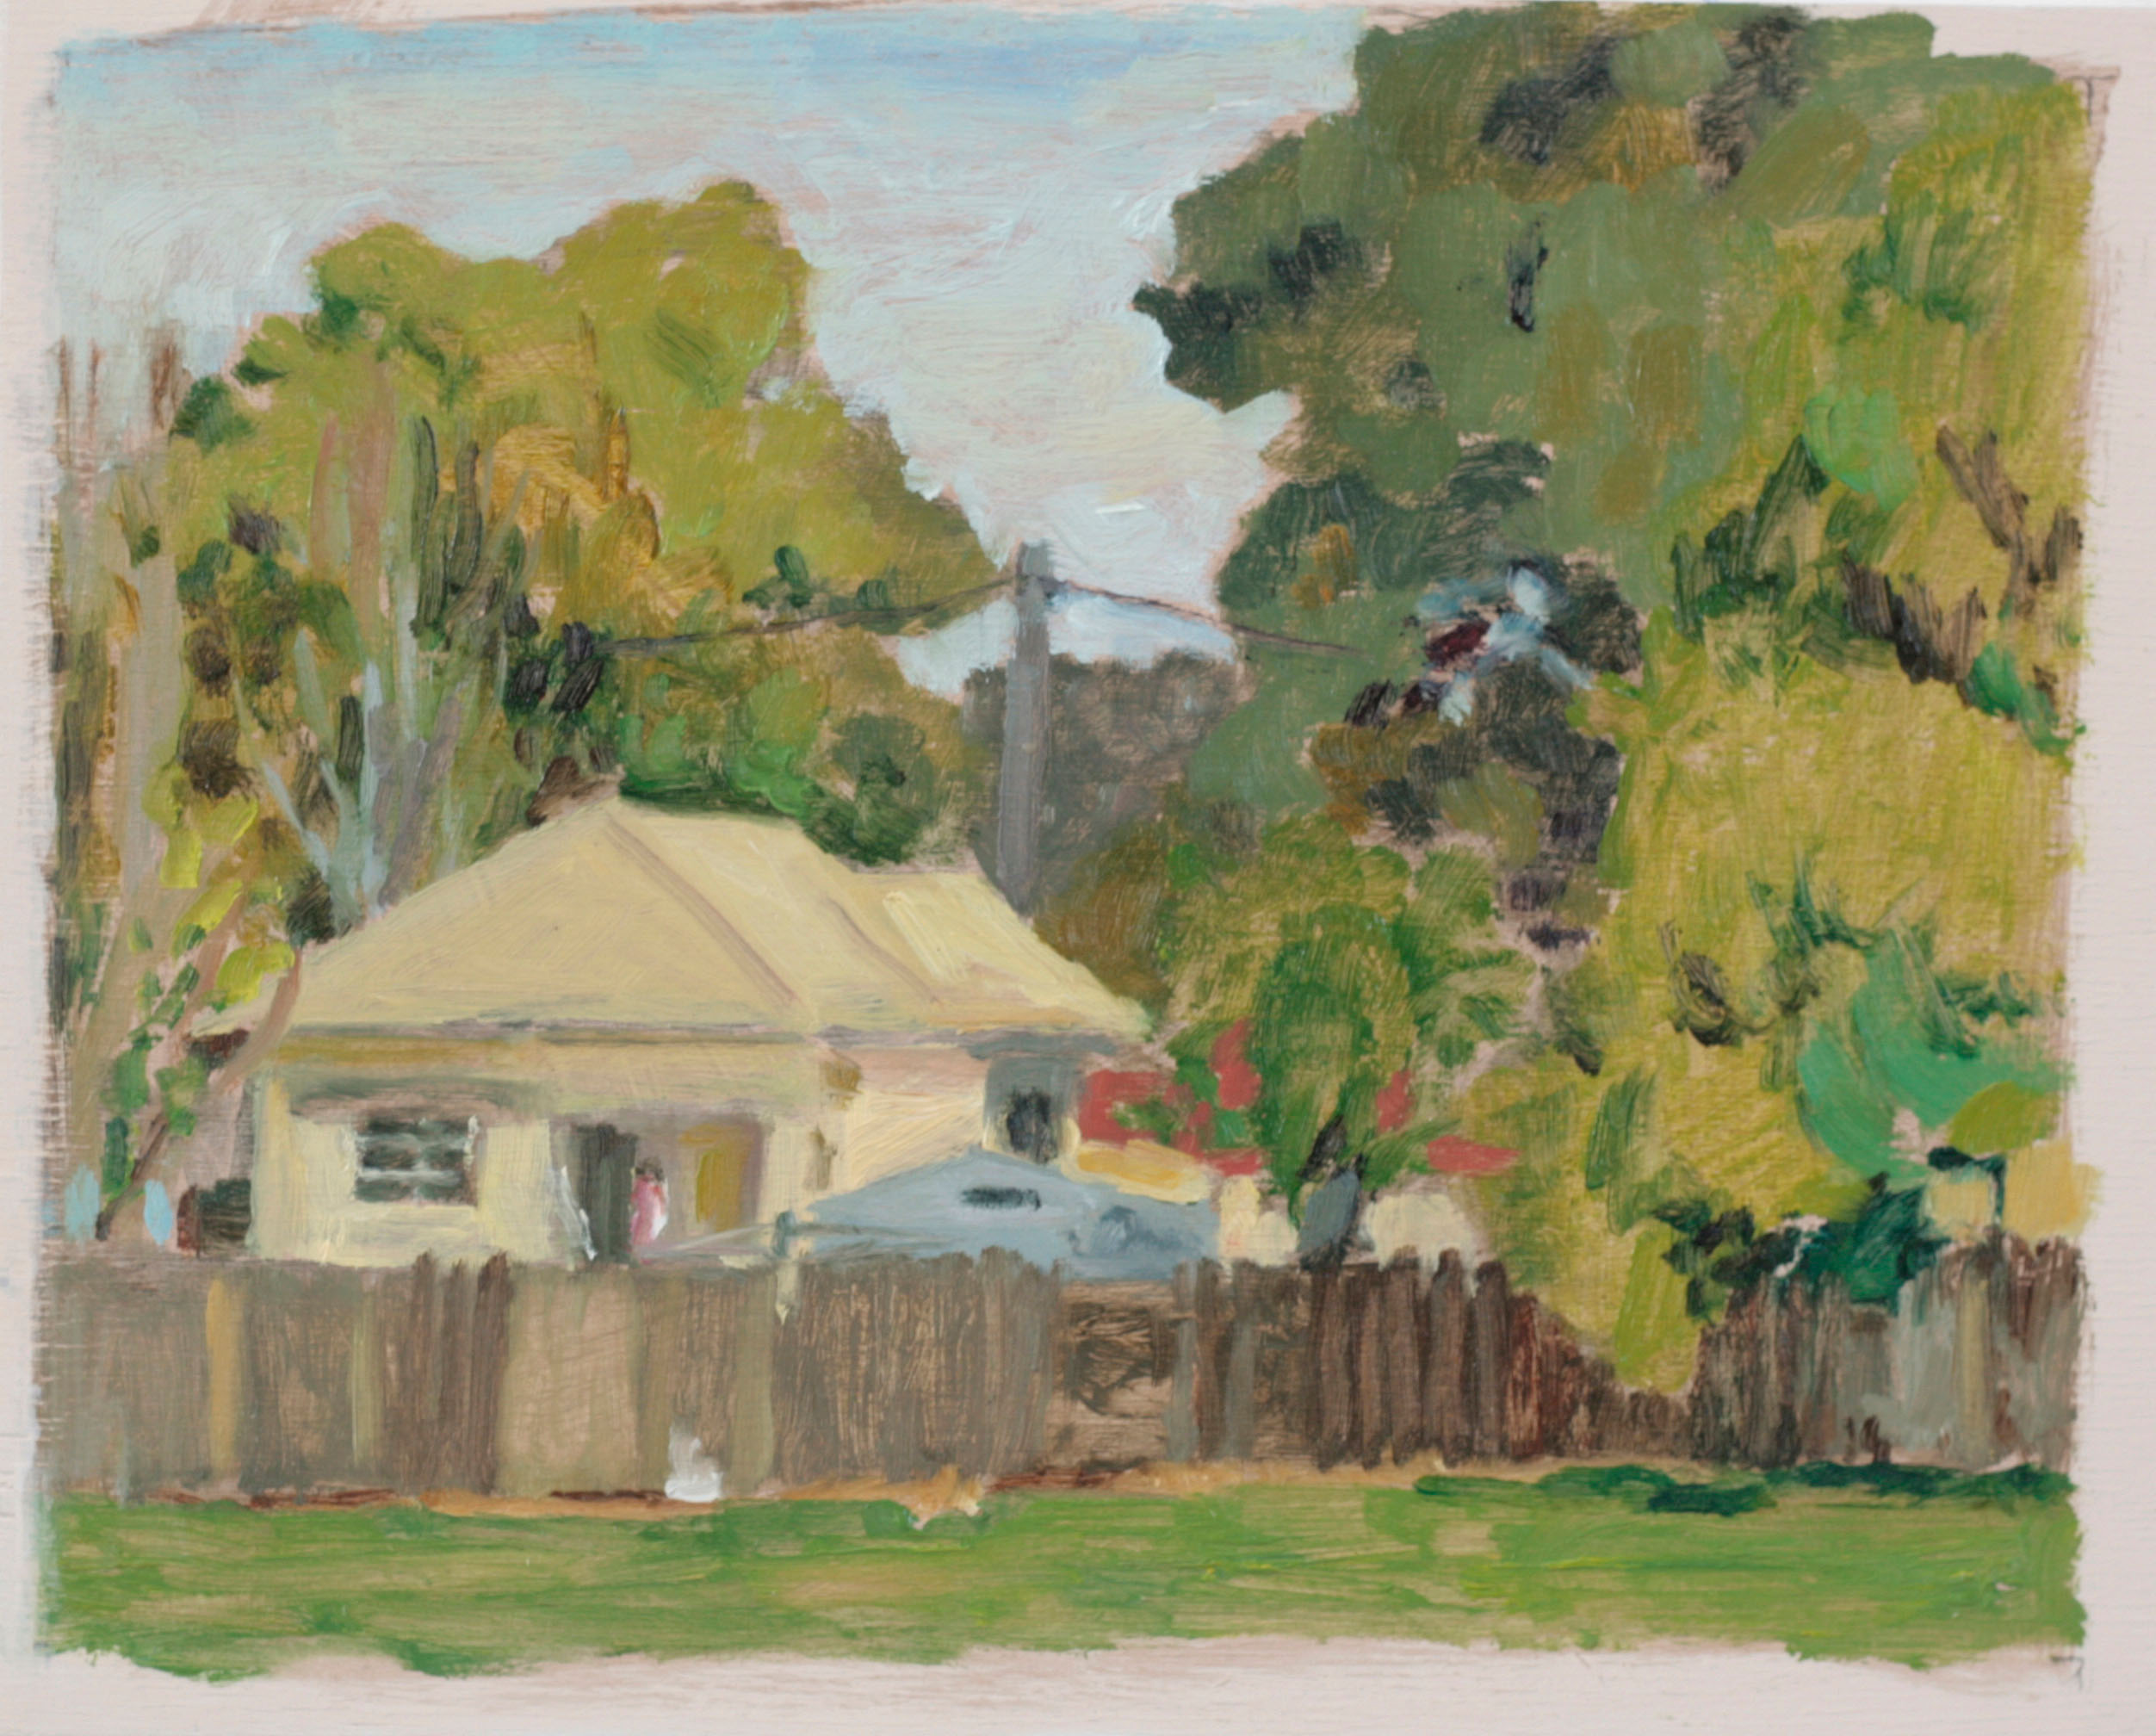 Join artist Zuza Zochowski to experience Plein Air painting in the grounds of Hazelhurst.